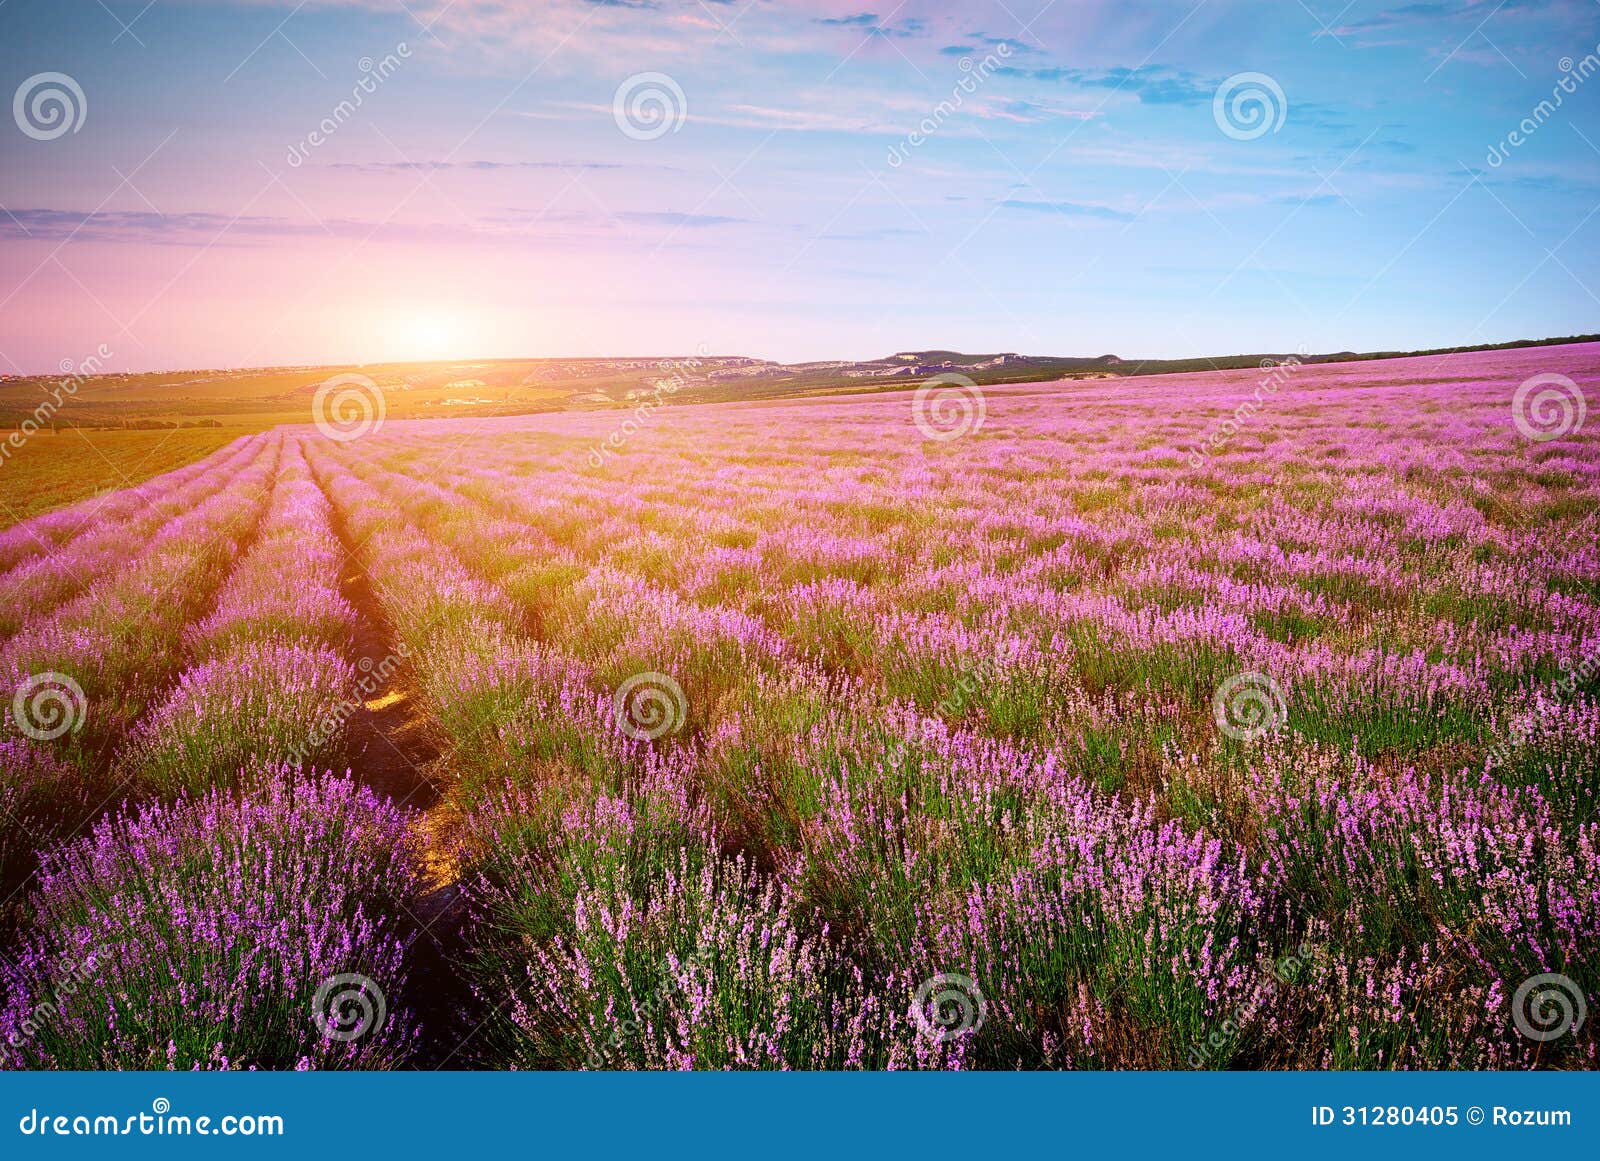 Meadow of lavender stock image. Image of france, green - 31280405